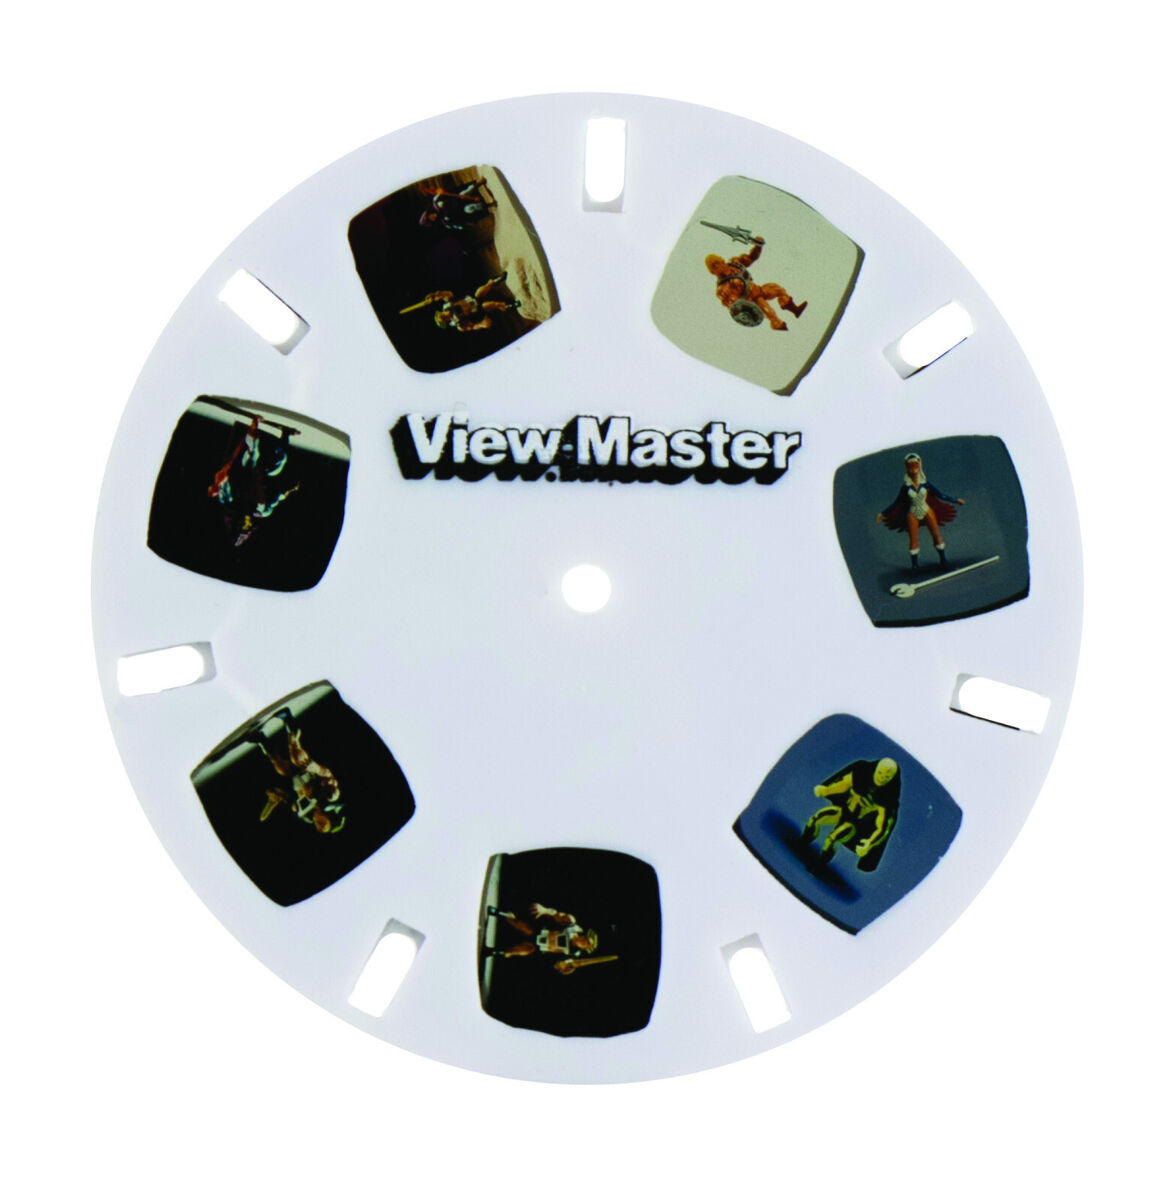 World's Smallest MOTU Masters of the Universe Viewmaster Viewer